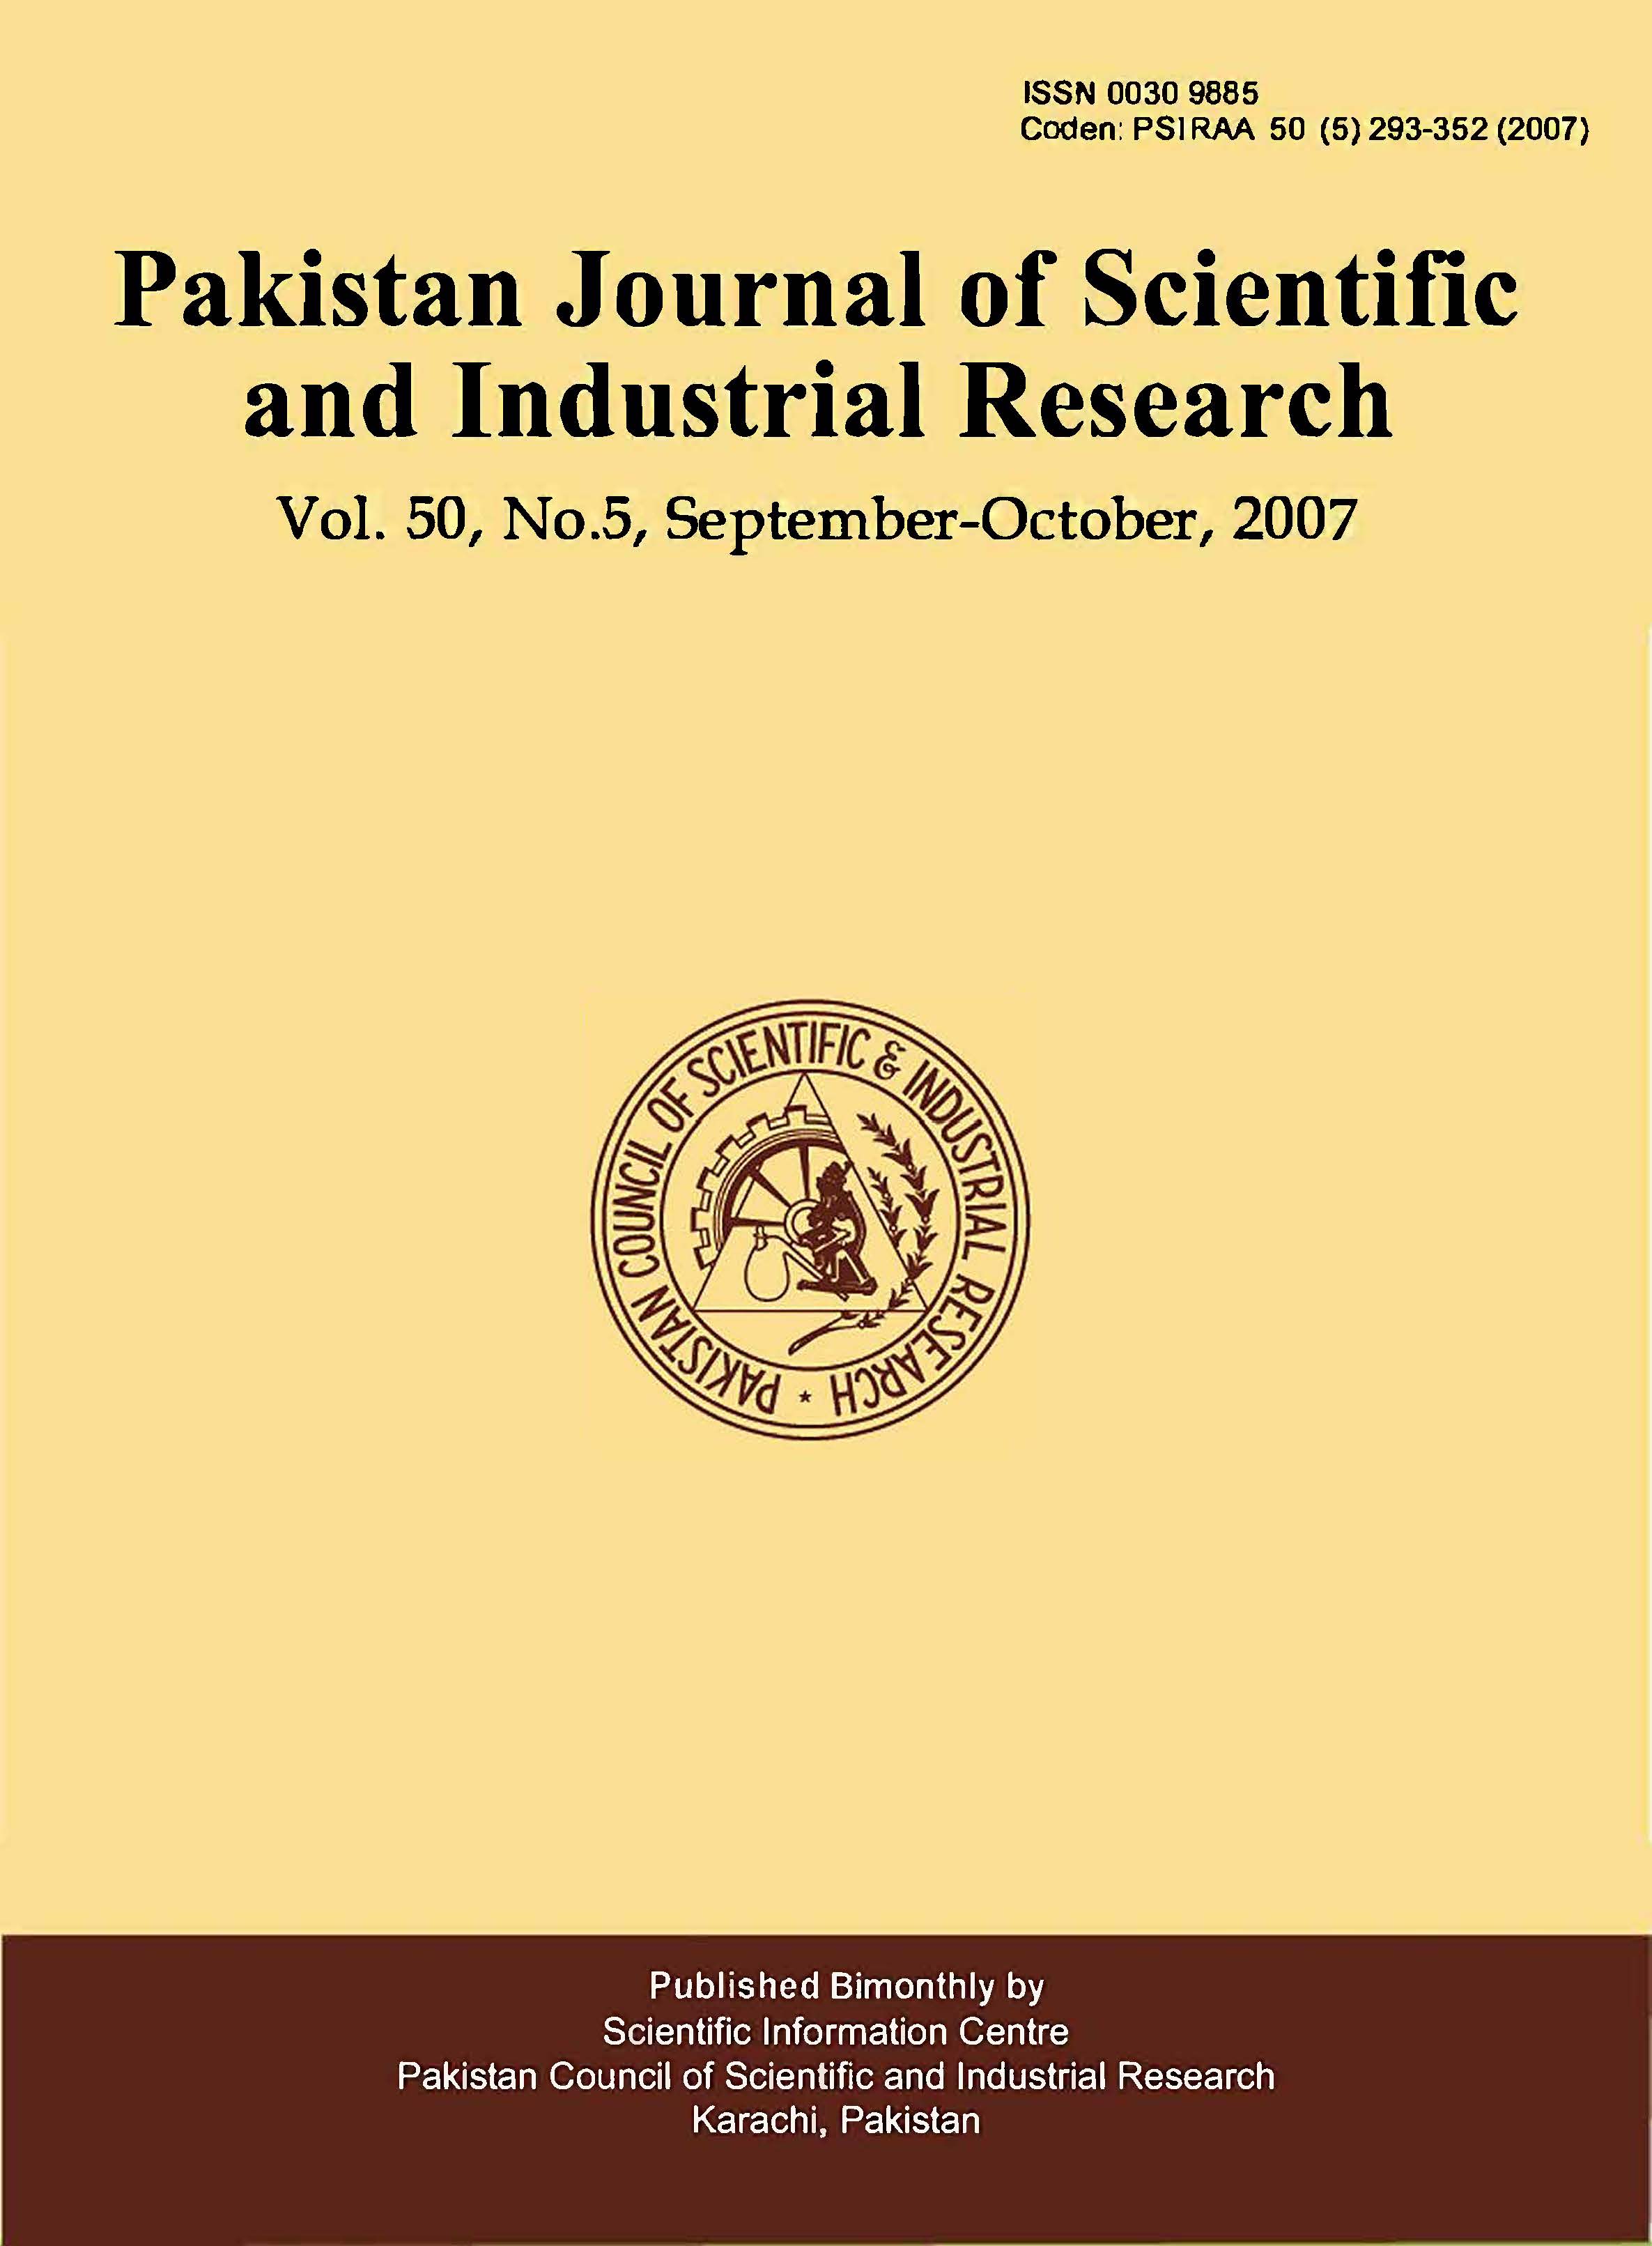 					View Vol. 50 No. 5 (2007): Pakistan Journal of Scientific and Industrial Research
				